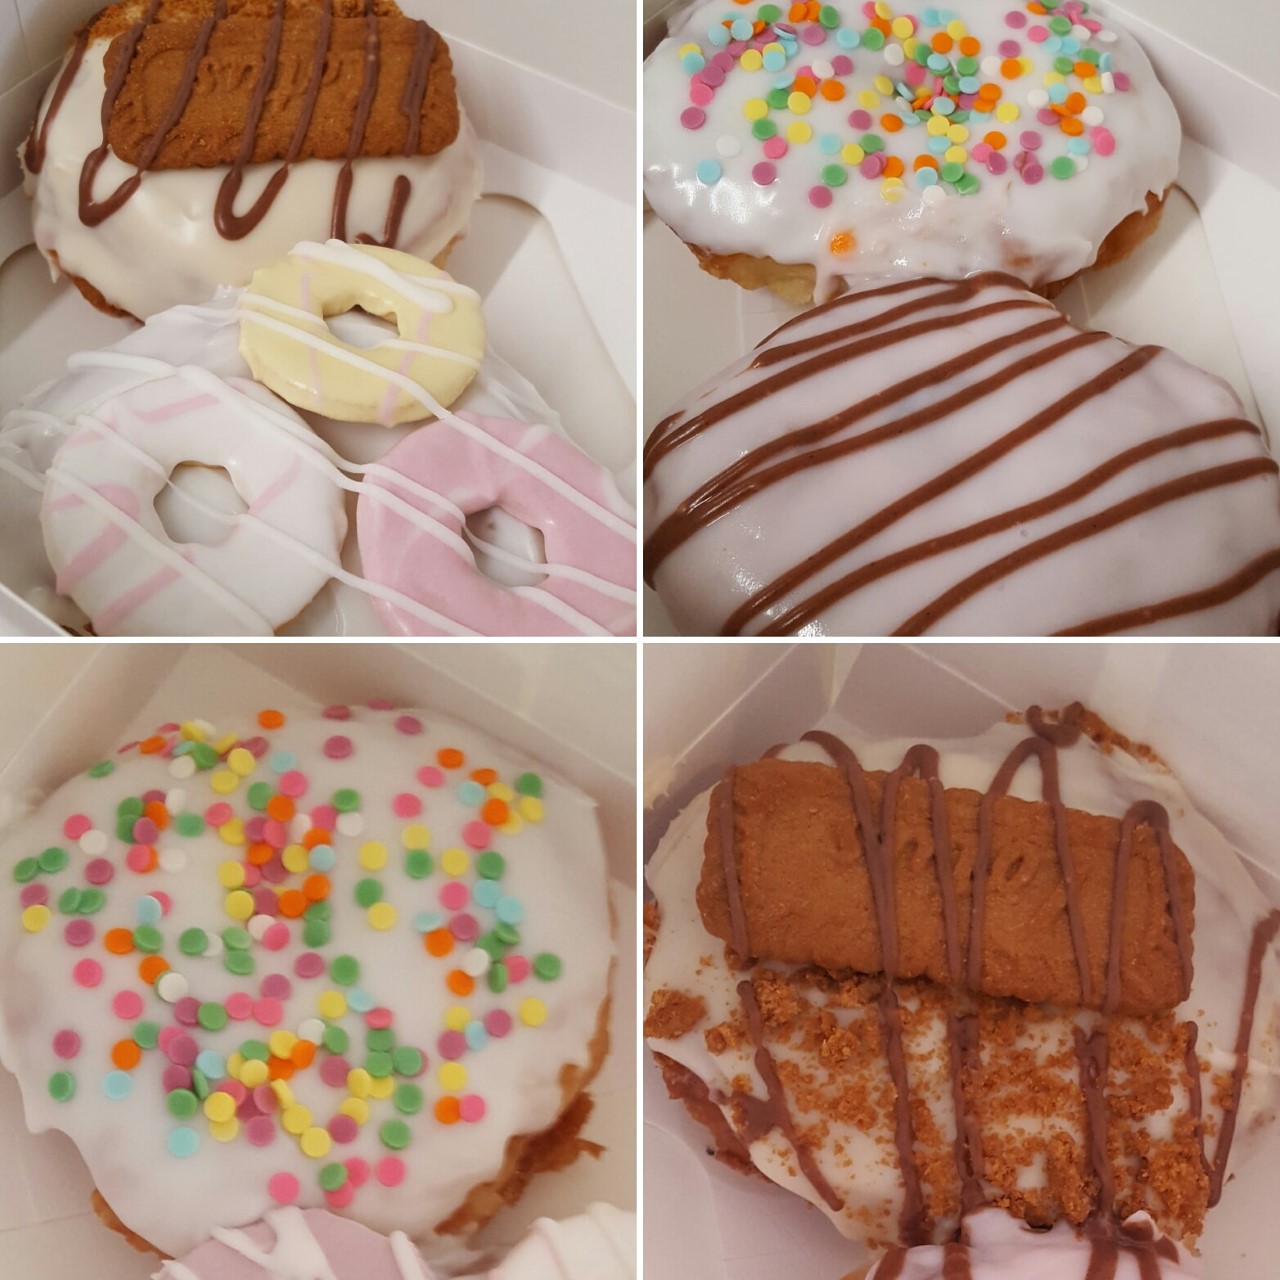 Doodle Donuts - Box of 2 Fried Donuts **PRE ORDER FOR COLLECTION THURS 27 OR FRI 28 JAN or NORWICH DELIVERY ON THURS 27 JAN** (see product description for flavour options)